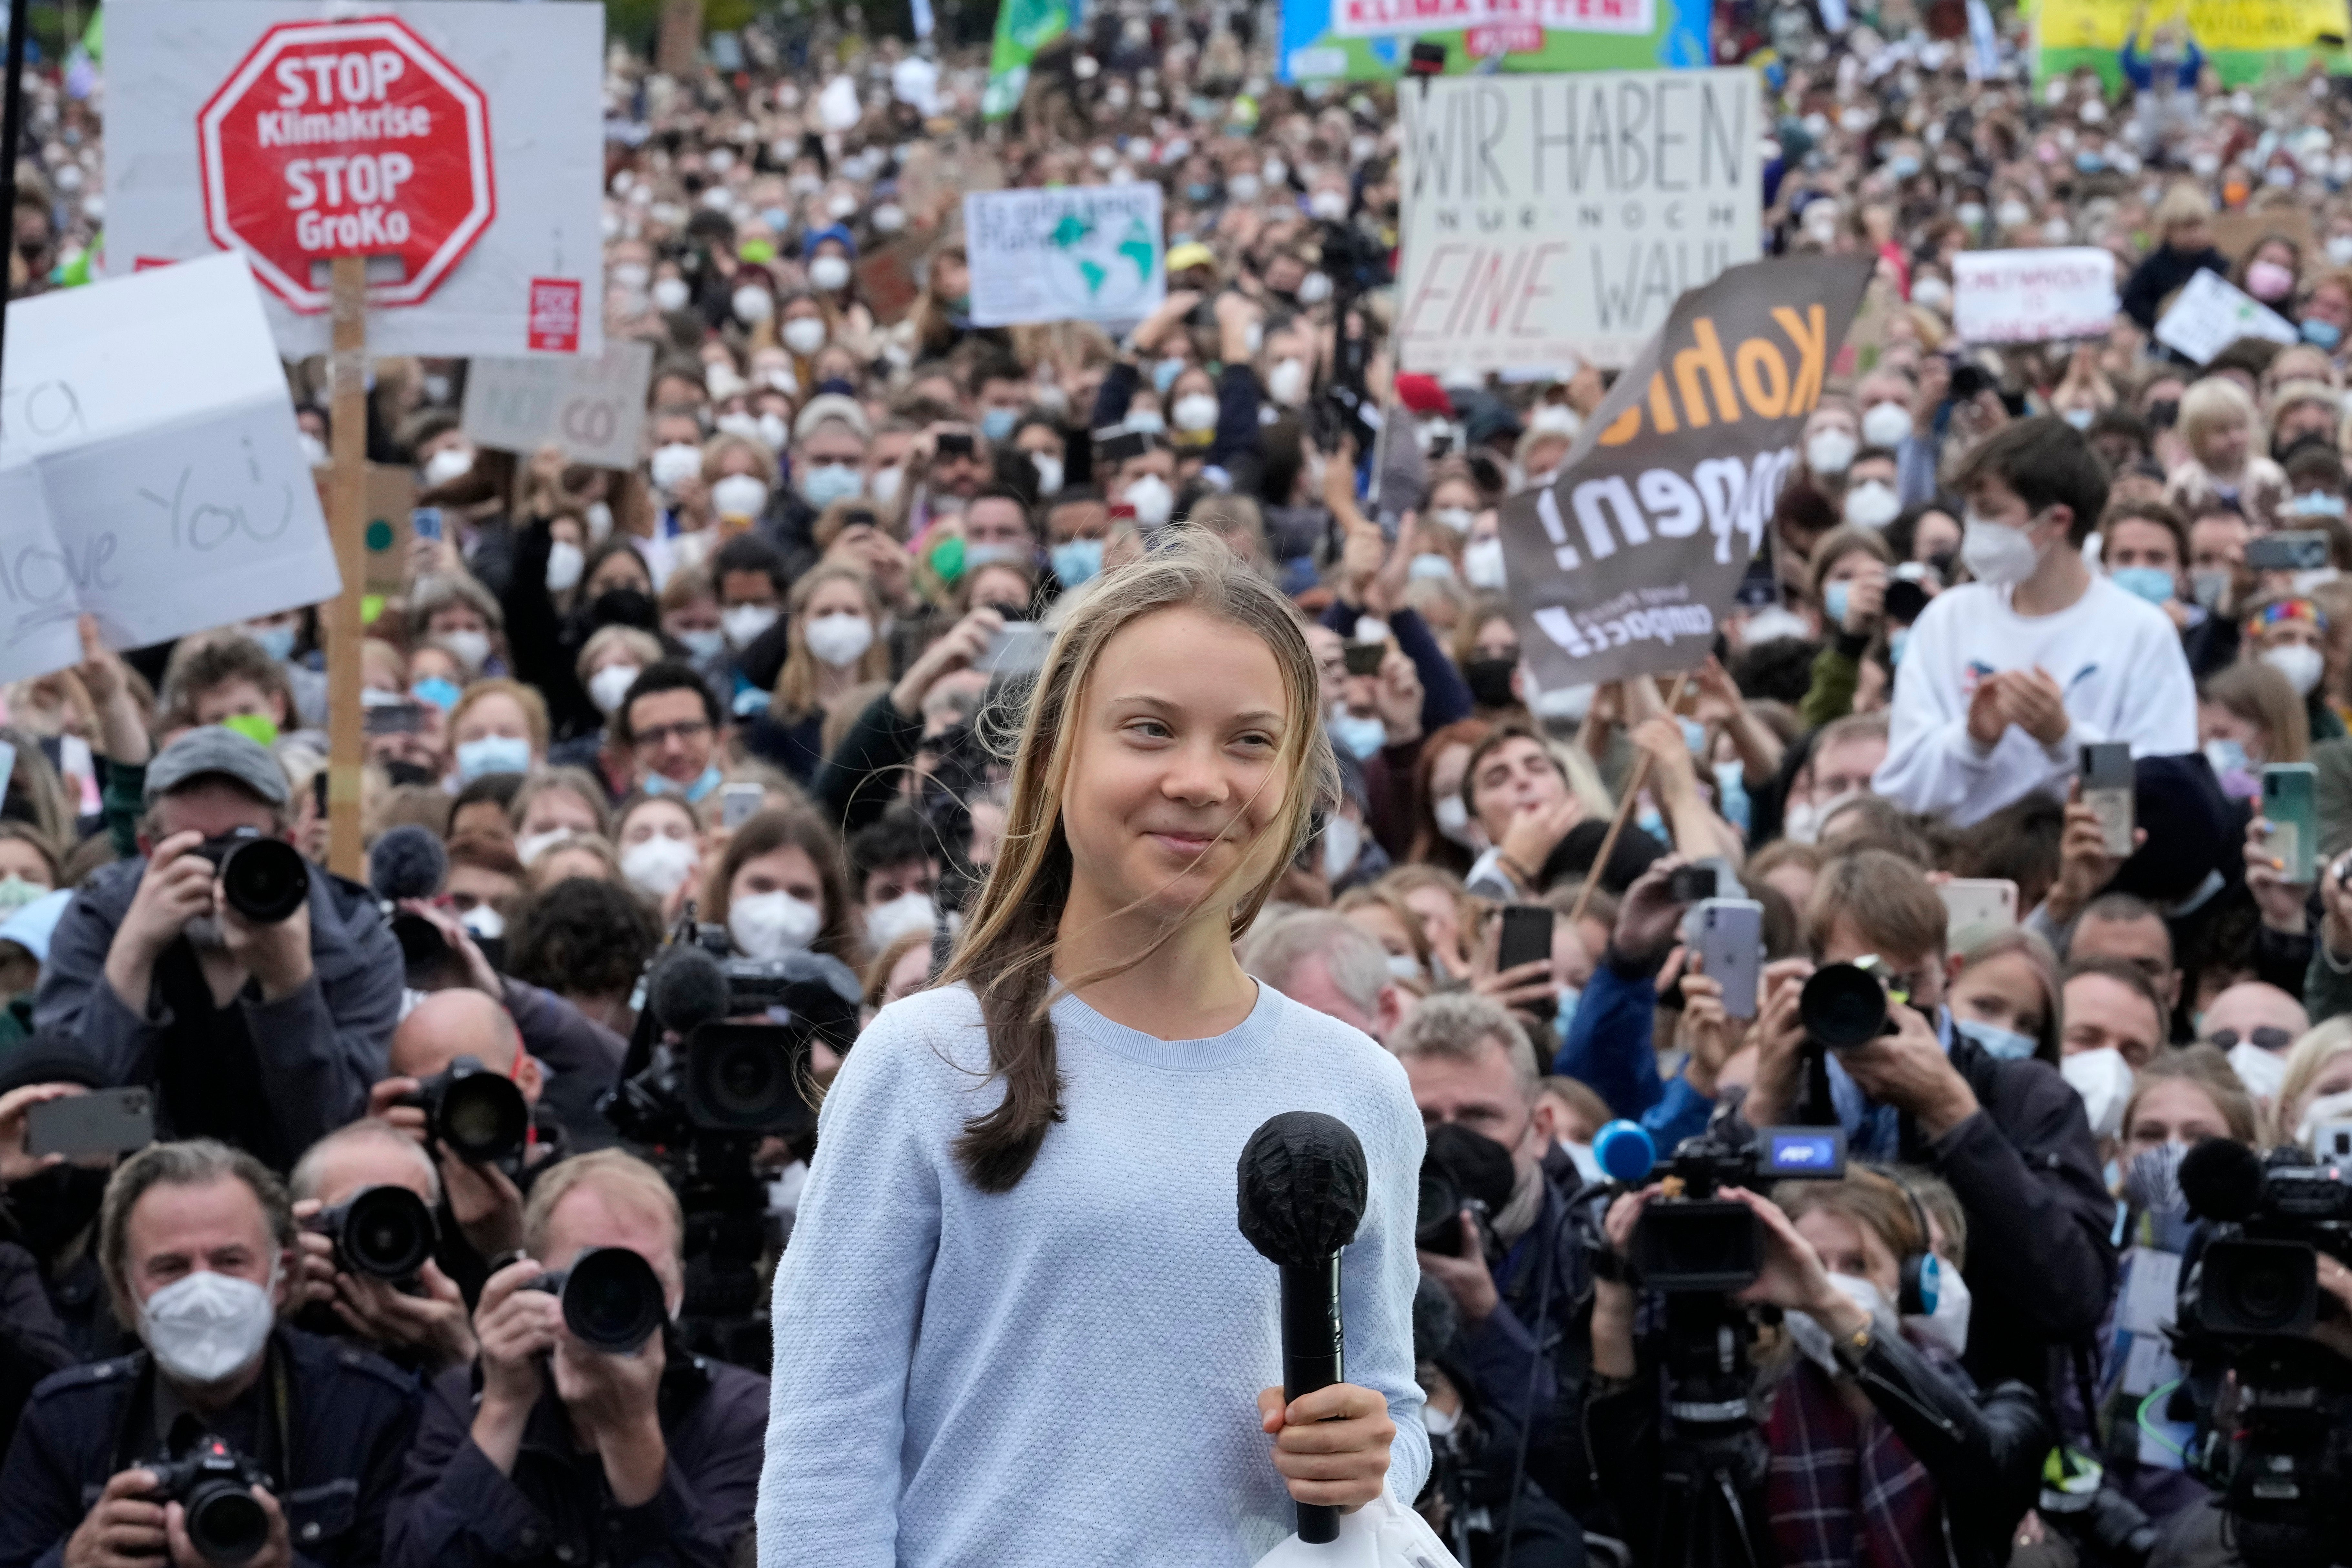 Greta Thunberg has appeared to back strikes in Glasgow